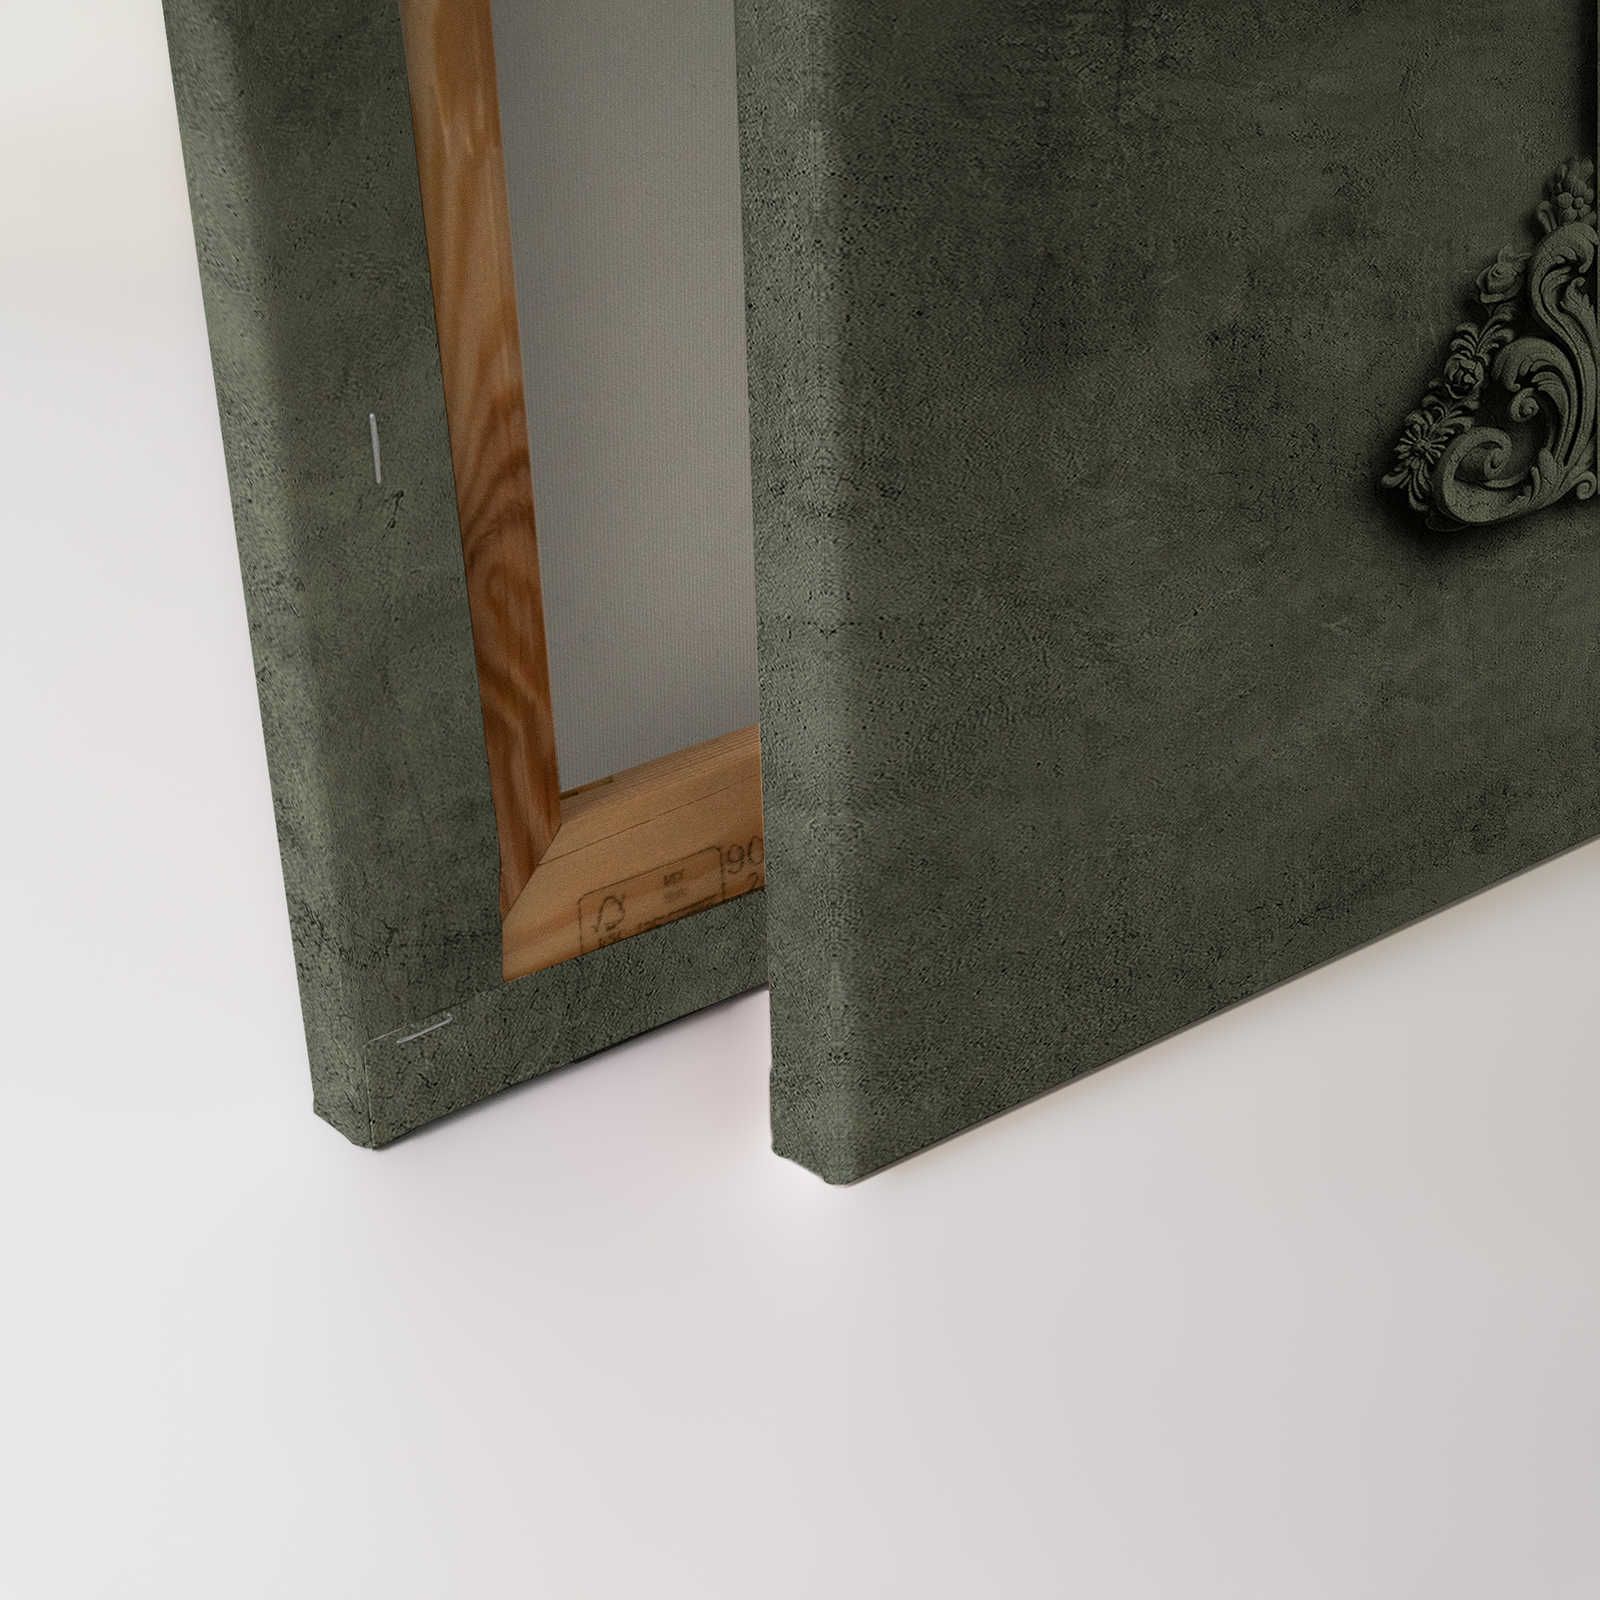             Lyon 2 - Canvas painting 3D stucco frame & plaster look in green - 0.90 m x 0.60 m
        